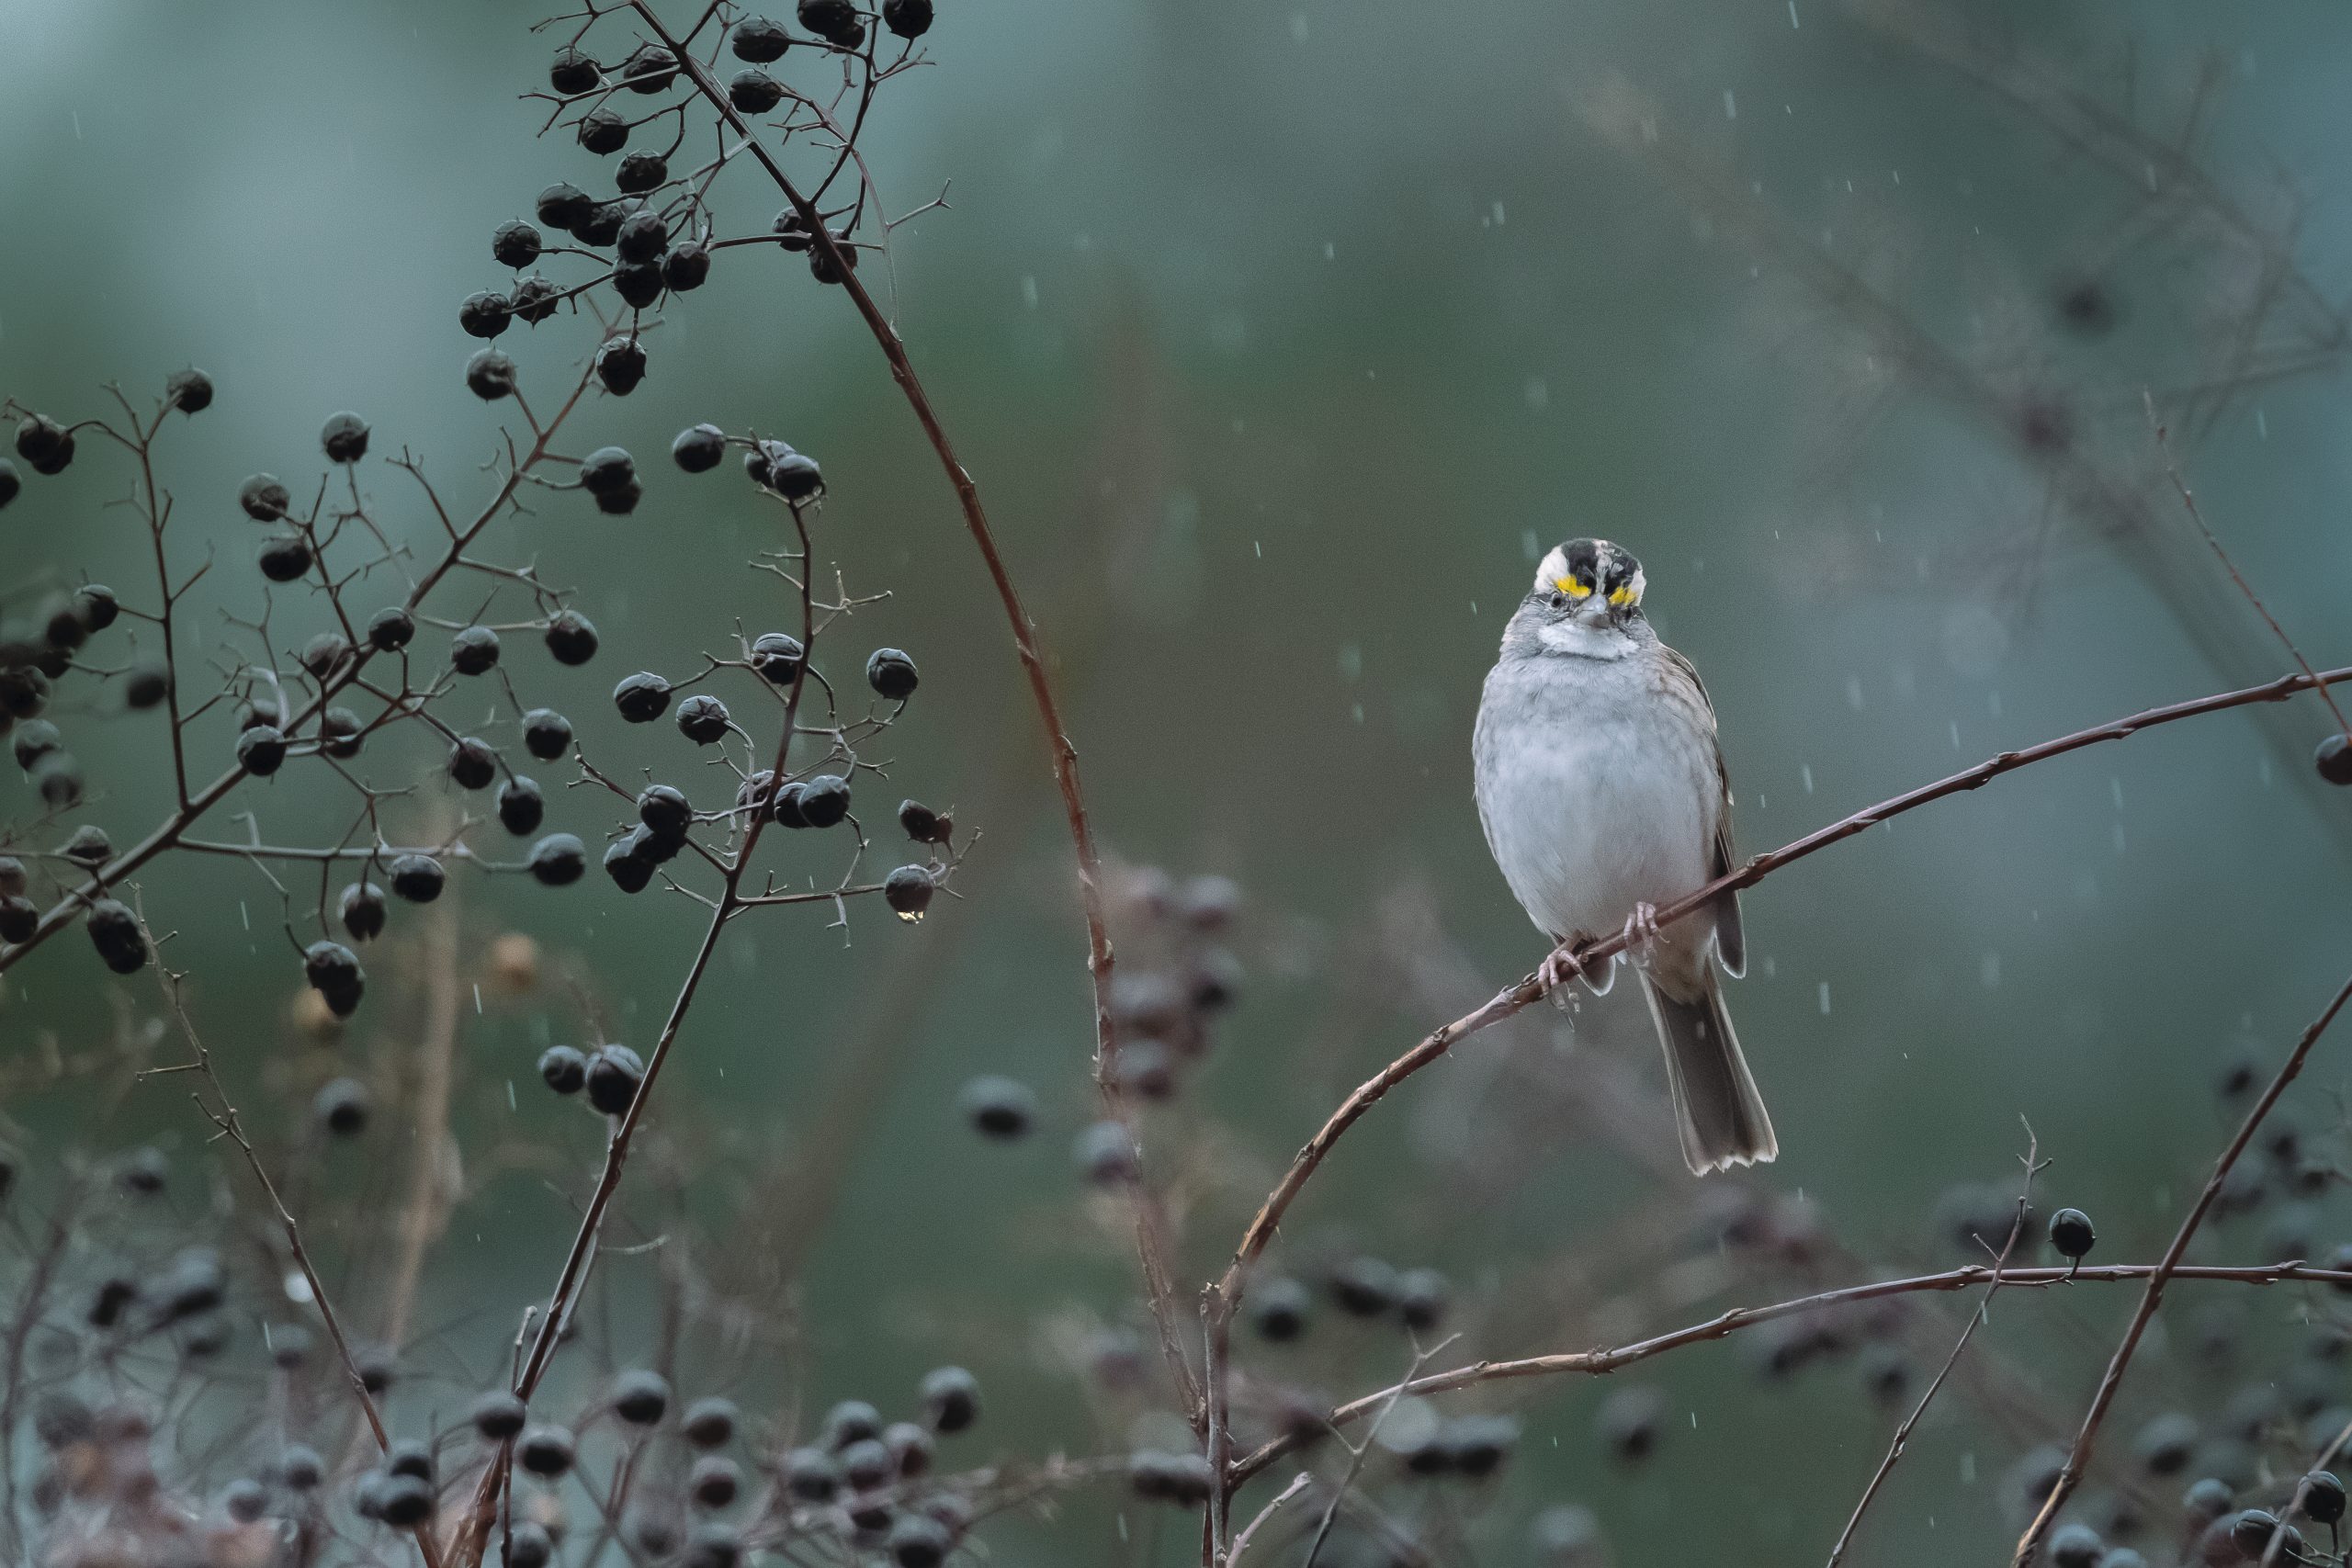 The White-throated Sparrow breeds in coniferous or mixed forests, often near clearings.  Its whistled song often sounds like “Old Sam Peabody” or “Oh Sweet Canada.”
